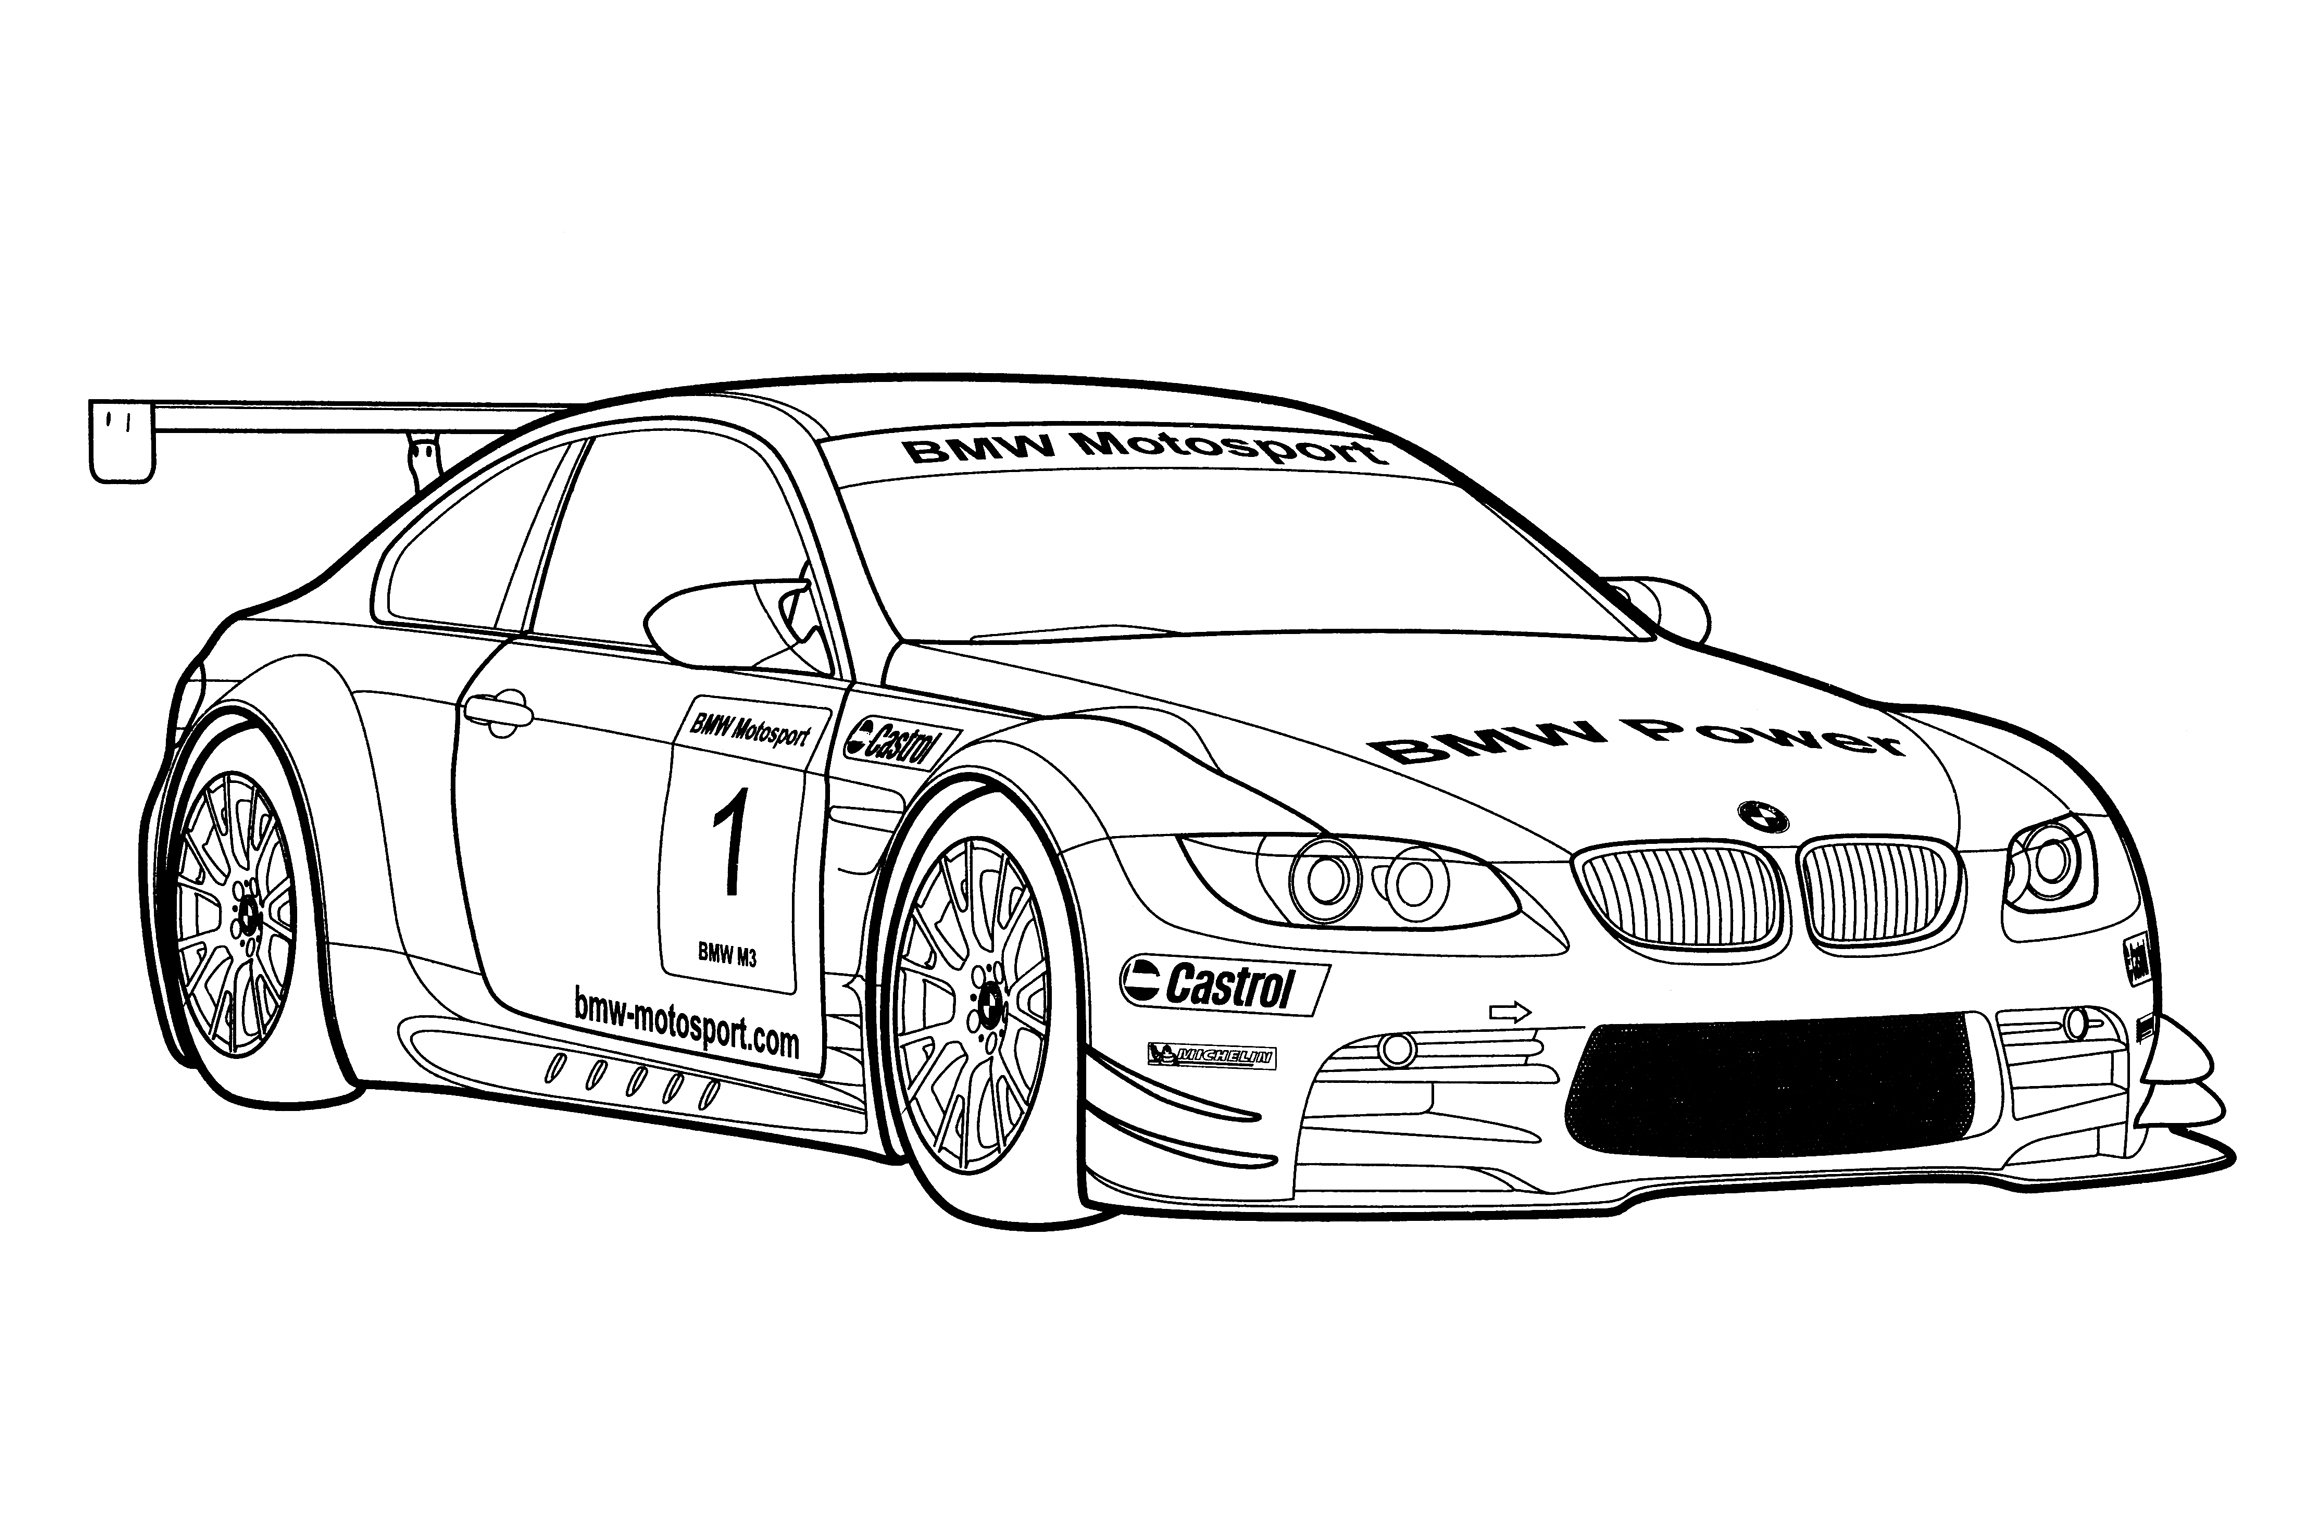 BMW M3 ALMS Race Car coloring page - free and printable